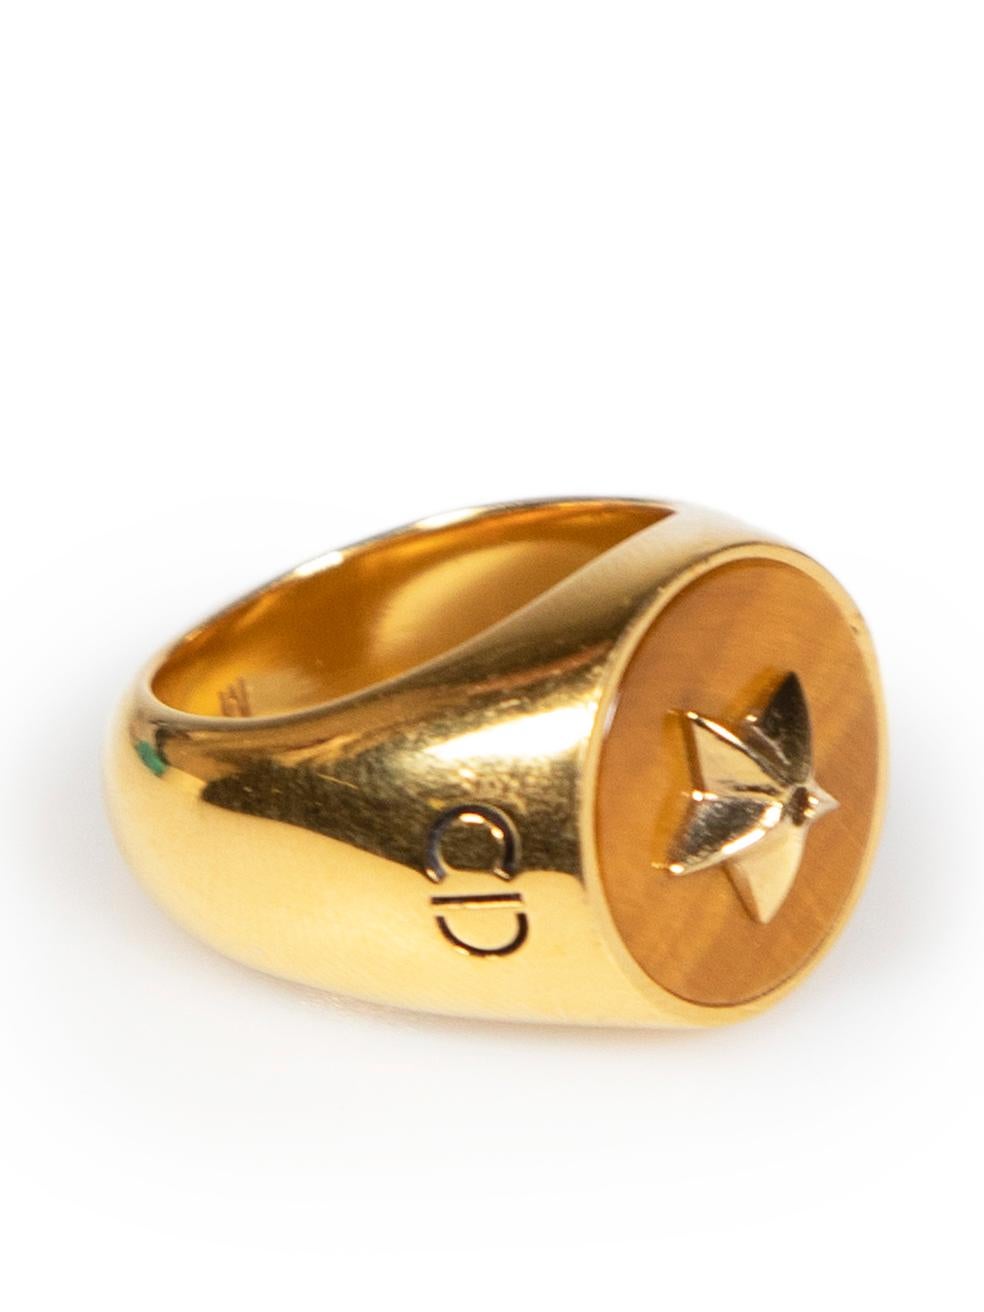 CONDITION is Very good. Minimal wear to ring is evident. Minimal wear with light scratches to the metal on this used Dior designer resale item.
 
Details
Gold
Metal
Lucky charm signet ring
Star logo
CD initial detail
 
Composition
Metal
 
Size &